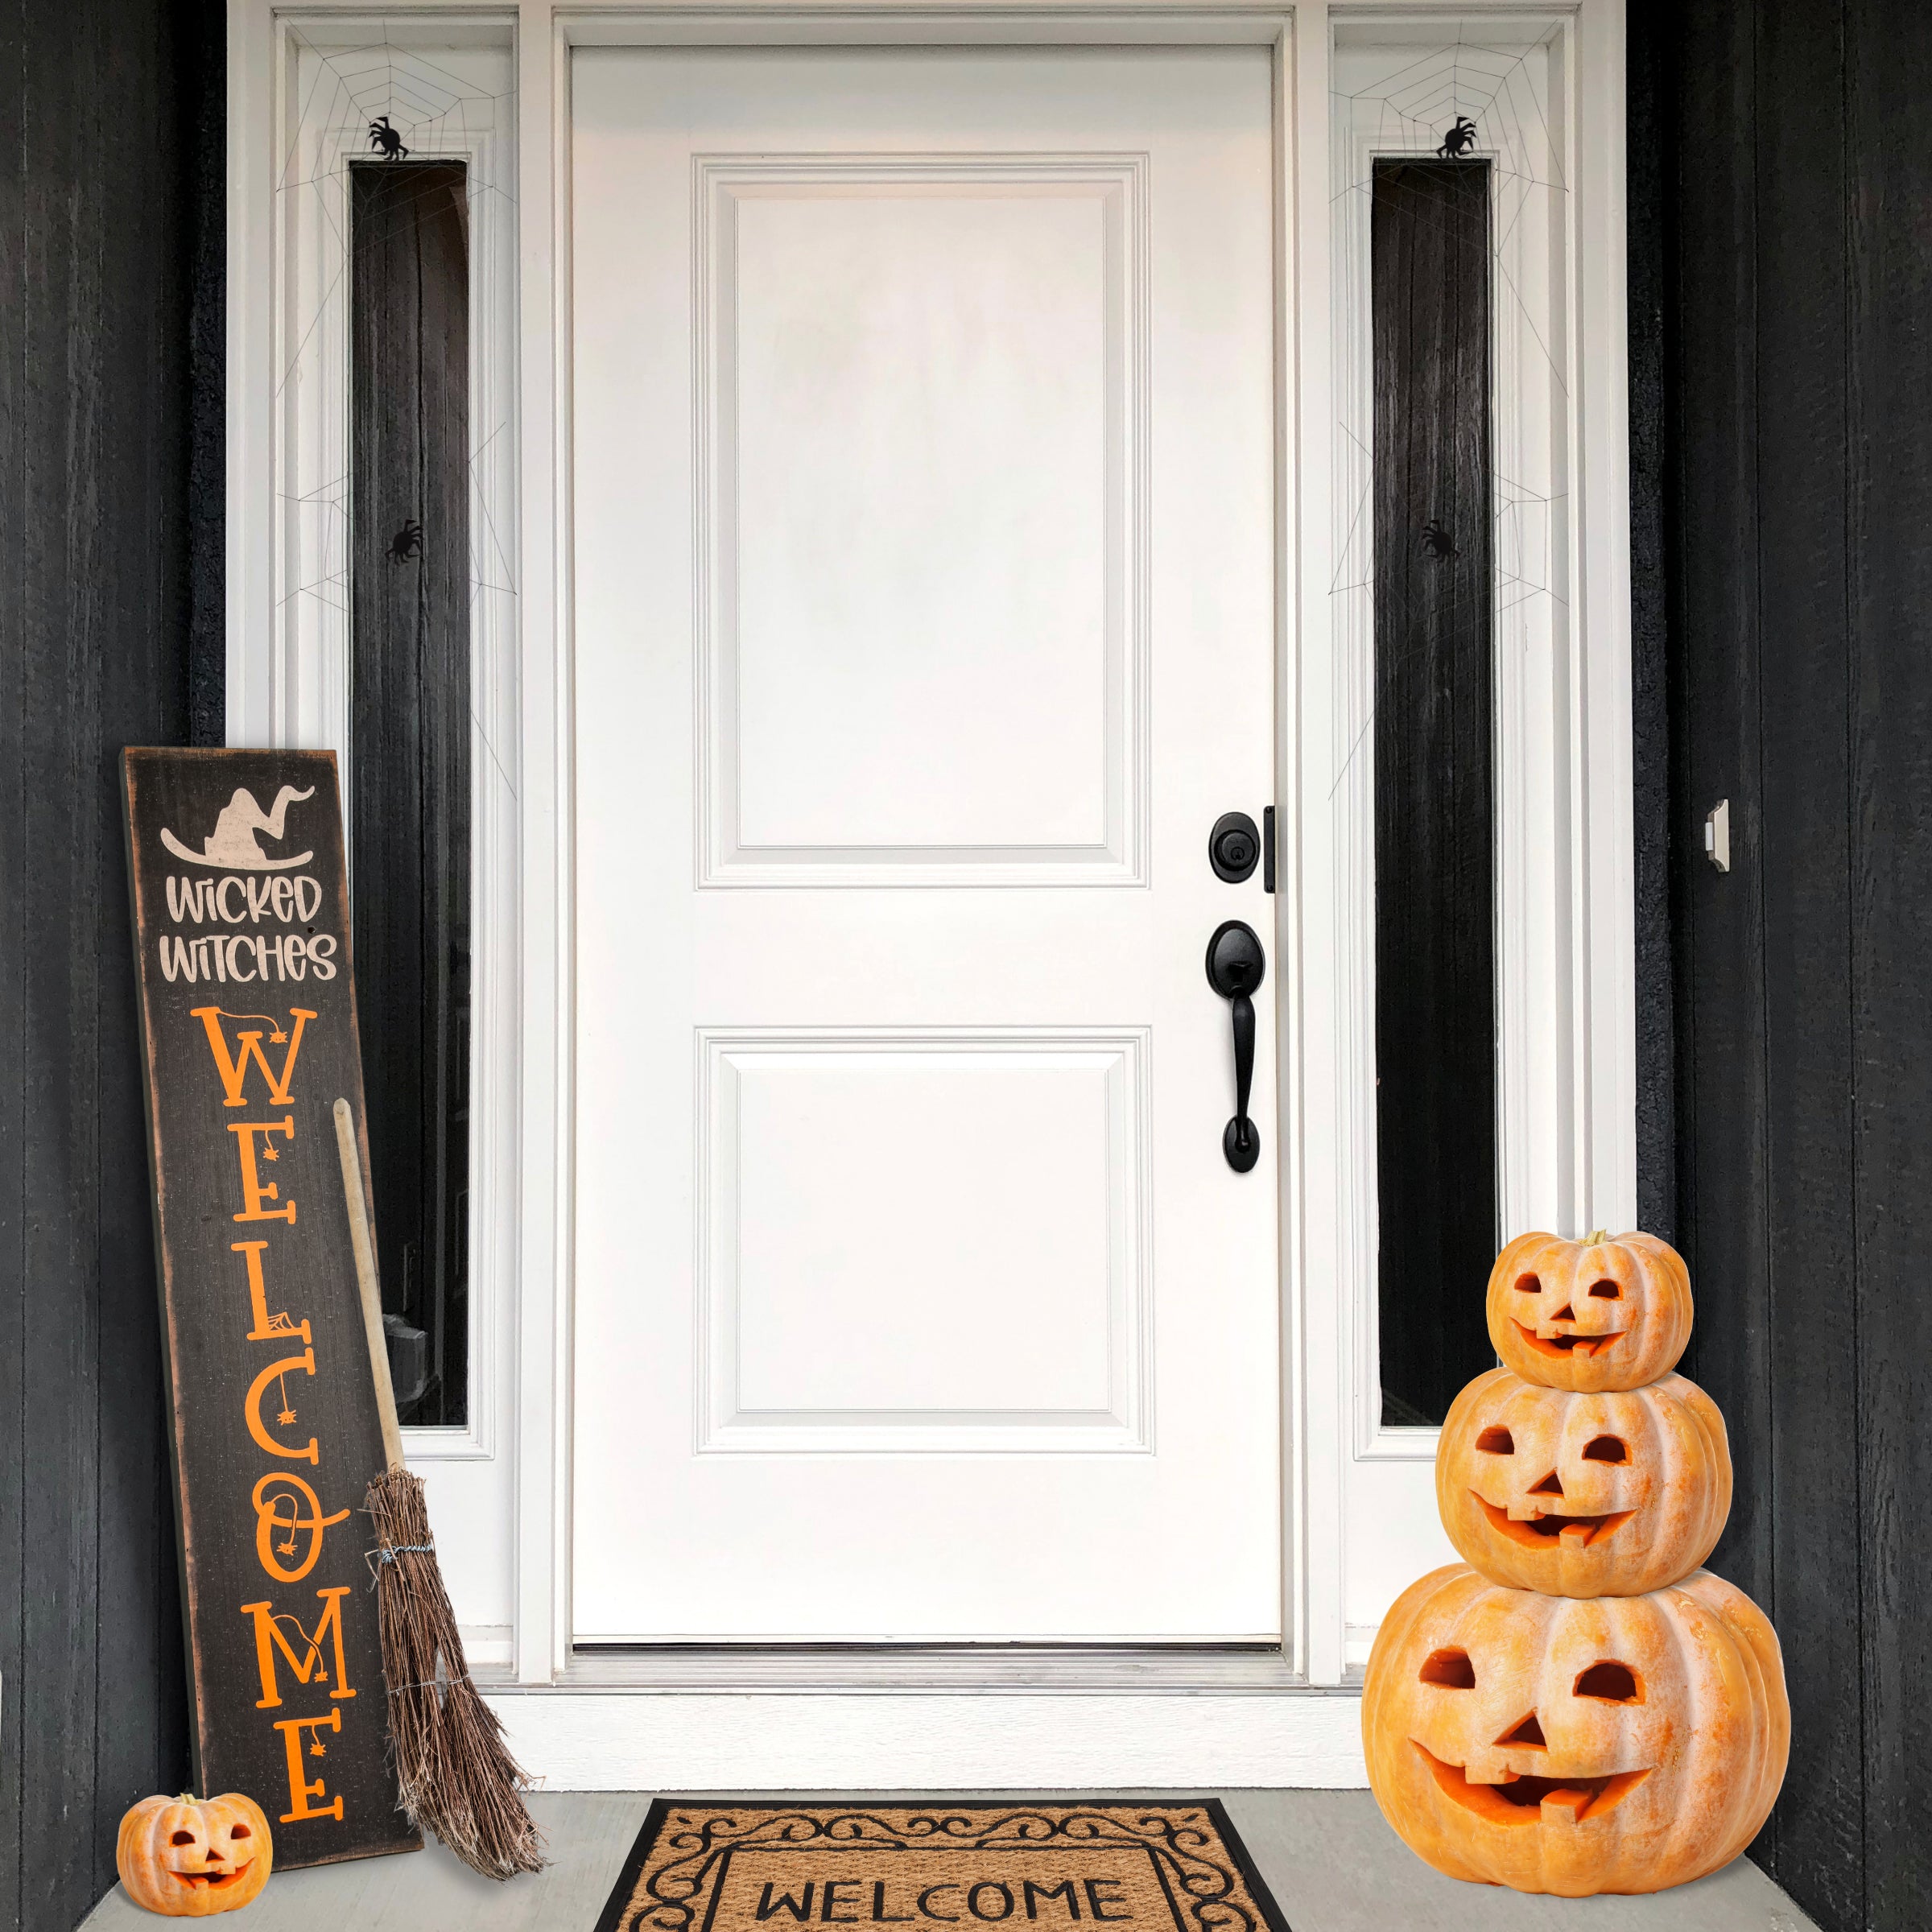 Halloween Hanging Porch Sign, Black, 'Wicked Witches Welcome', Wooden Construction, 39 Inches